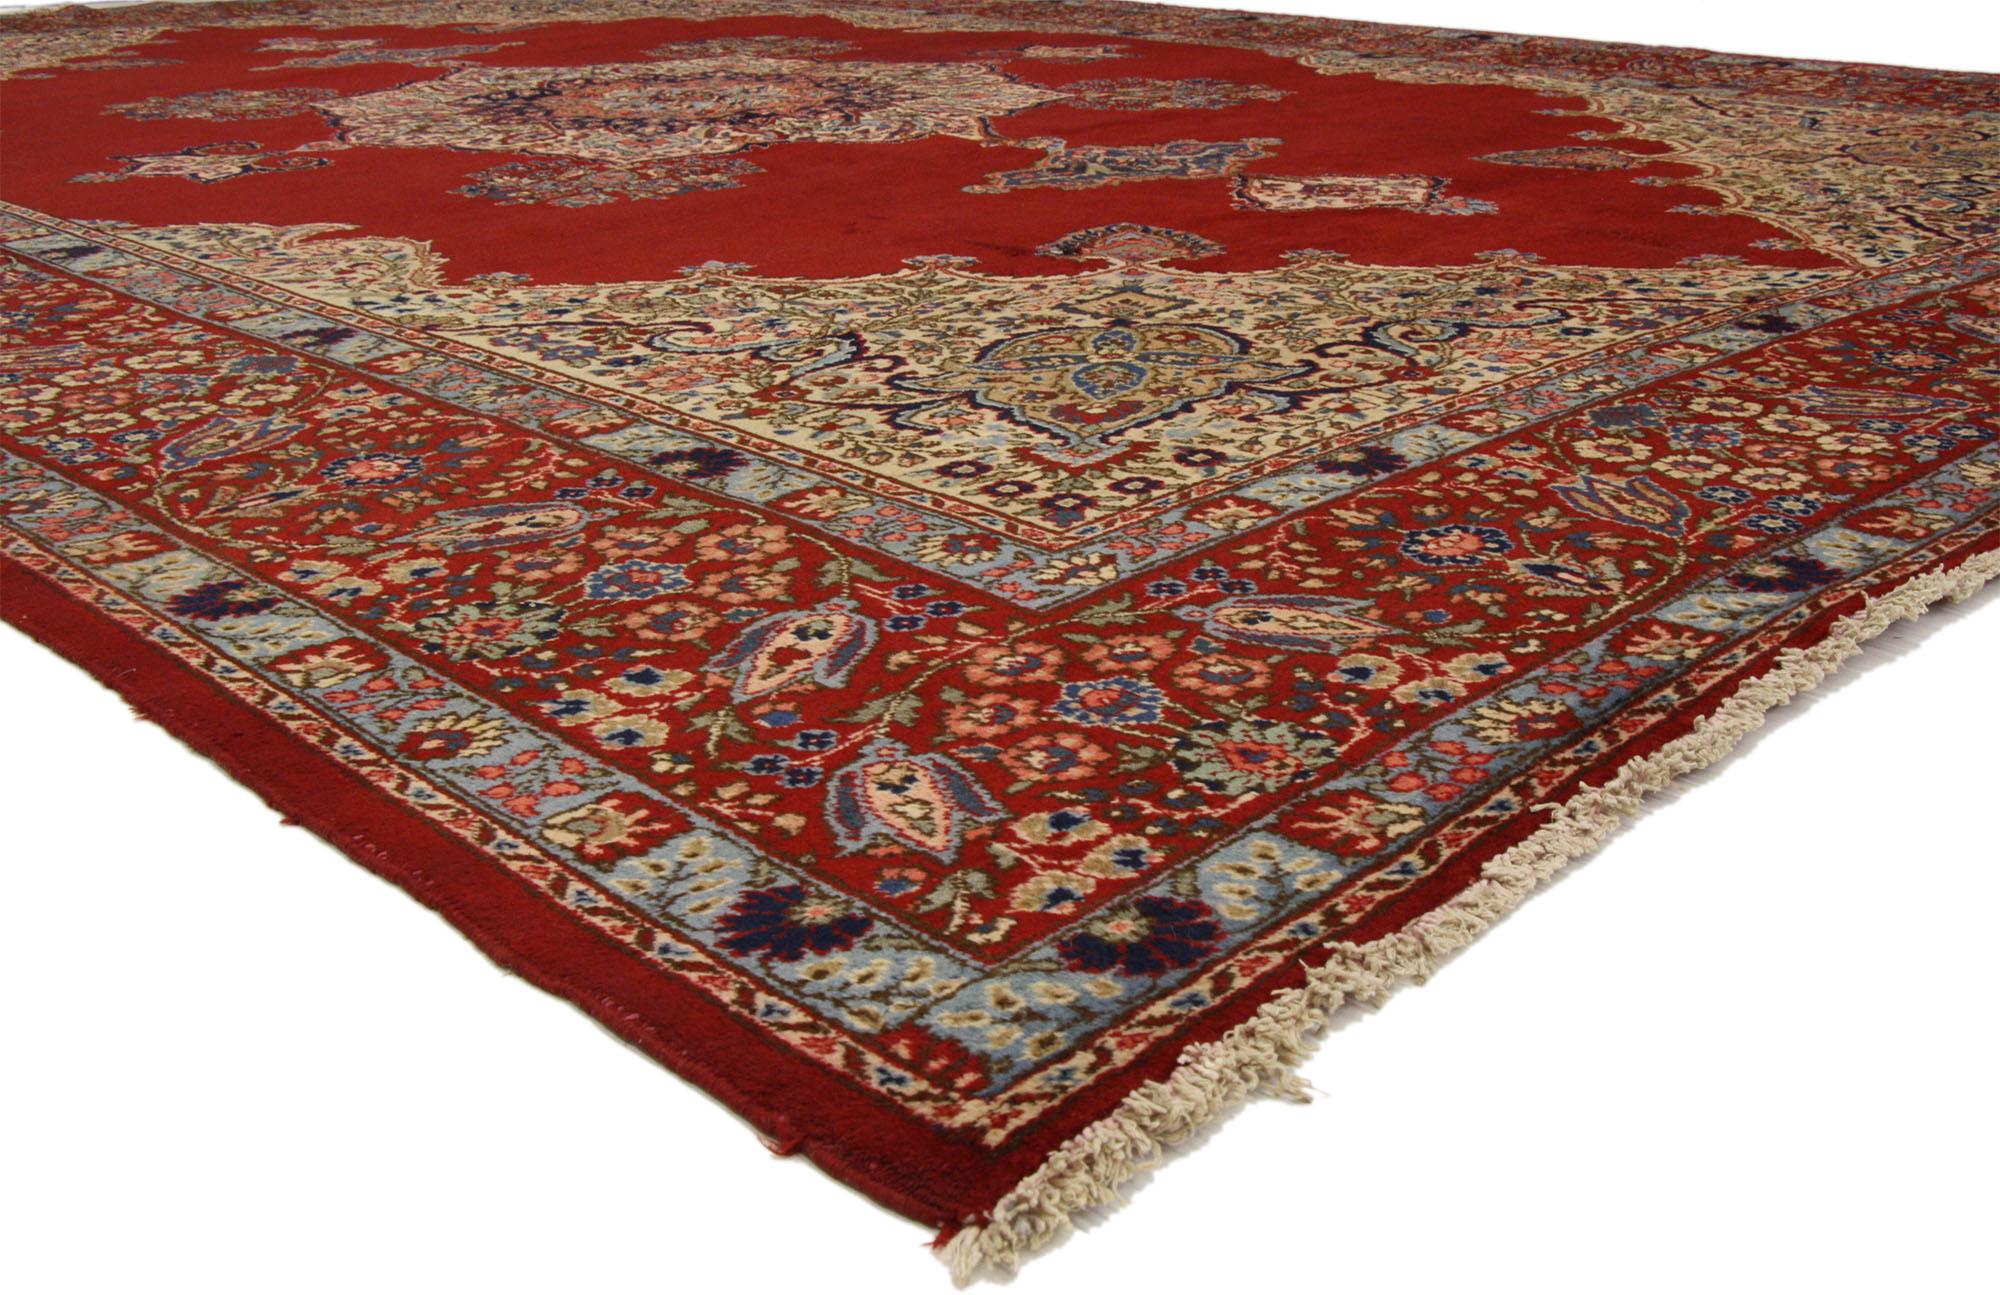 72013 Antique Persian Tabriz Palace Rug with Jacobean Style 11'9 x 17'6.  Rich colors and intricate with beguiling ambiance, this hand knotted wool antique Persian Tabriz palace size rug beautifully highlights Jacobean style. A grand medallion